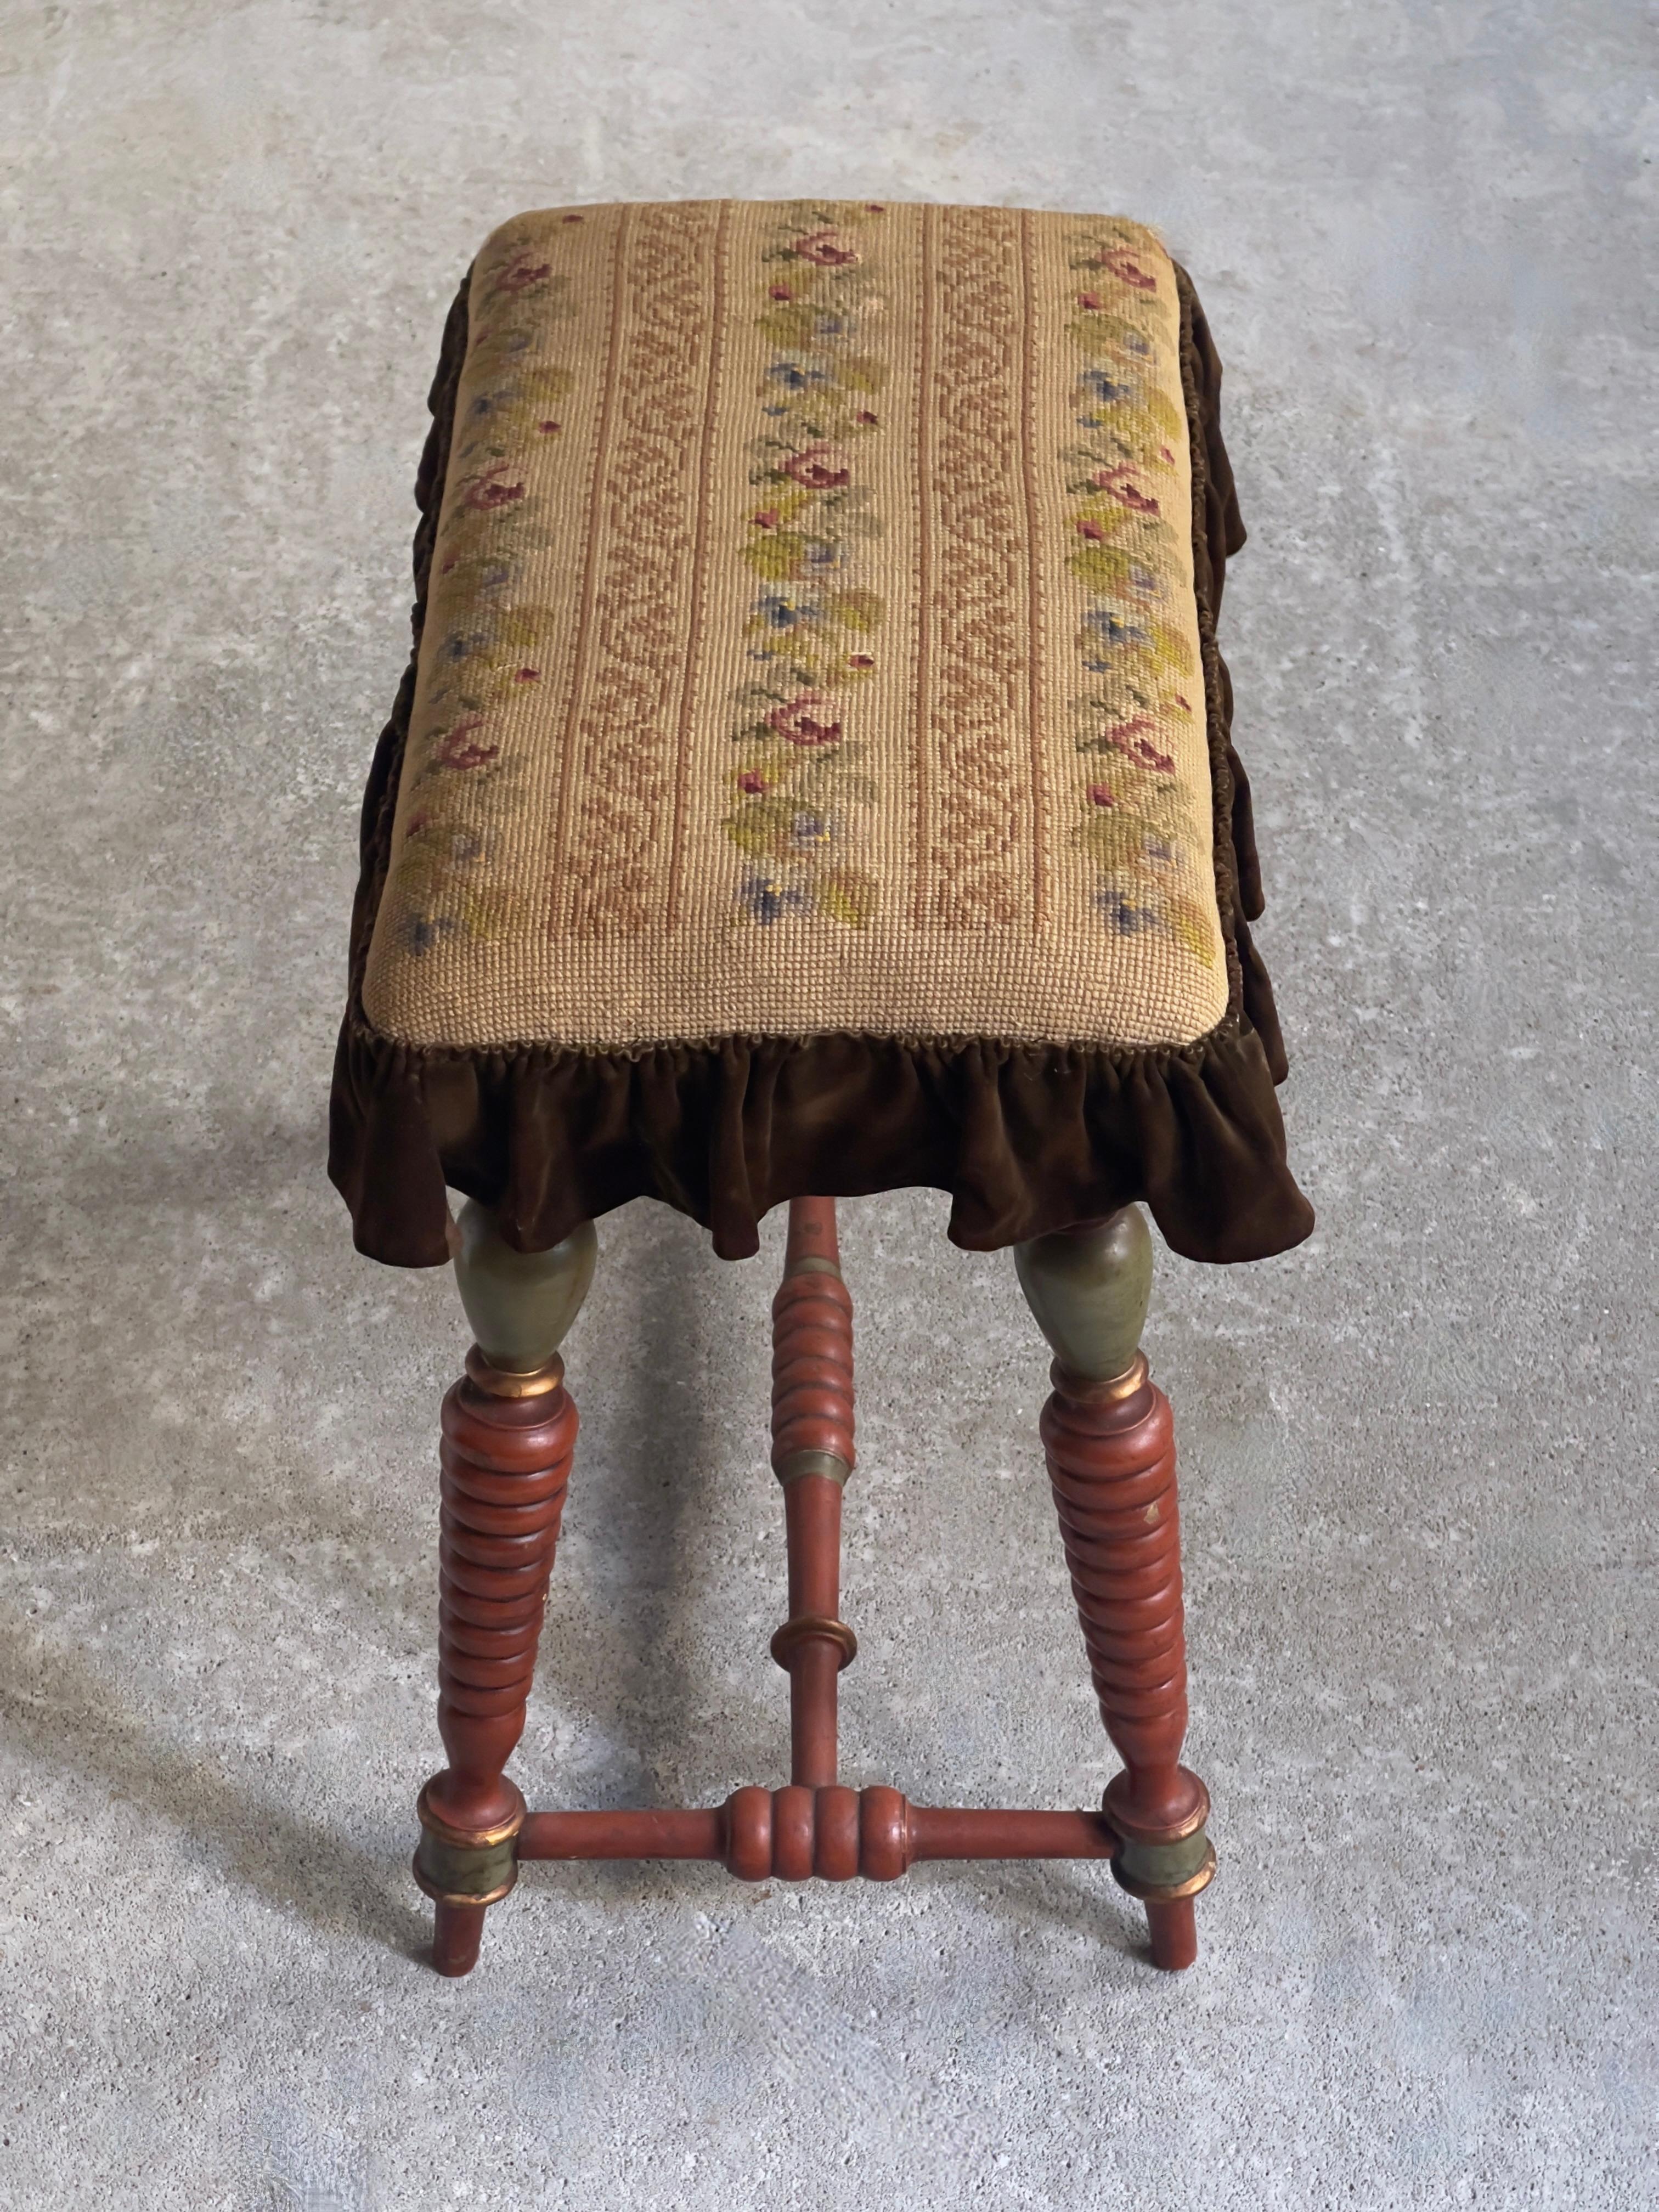 Wood Danish Late 19th century Stool with carved painted legs and embroidered seat. For Sale